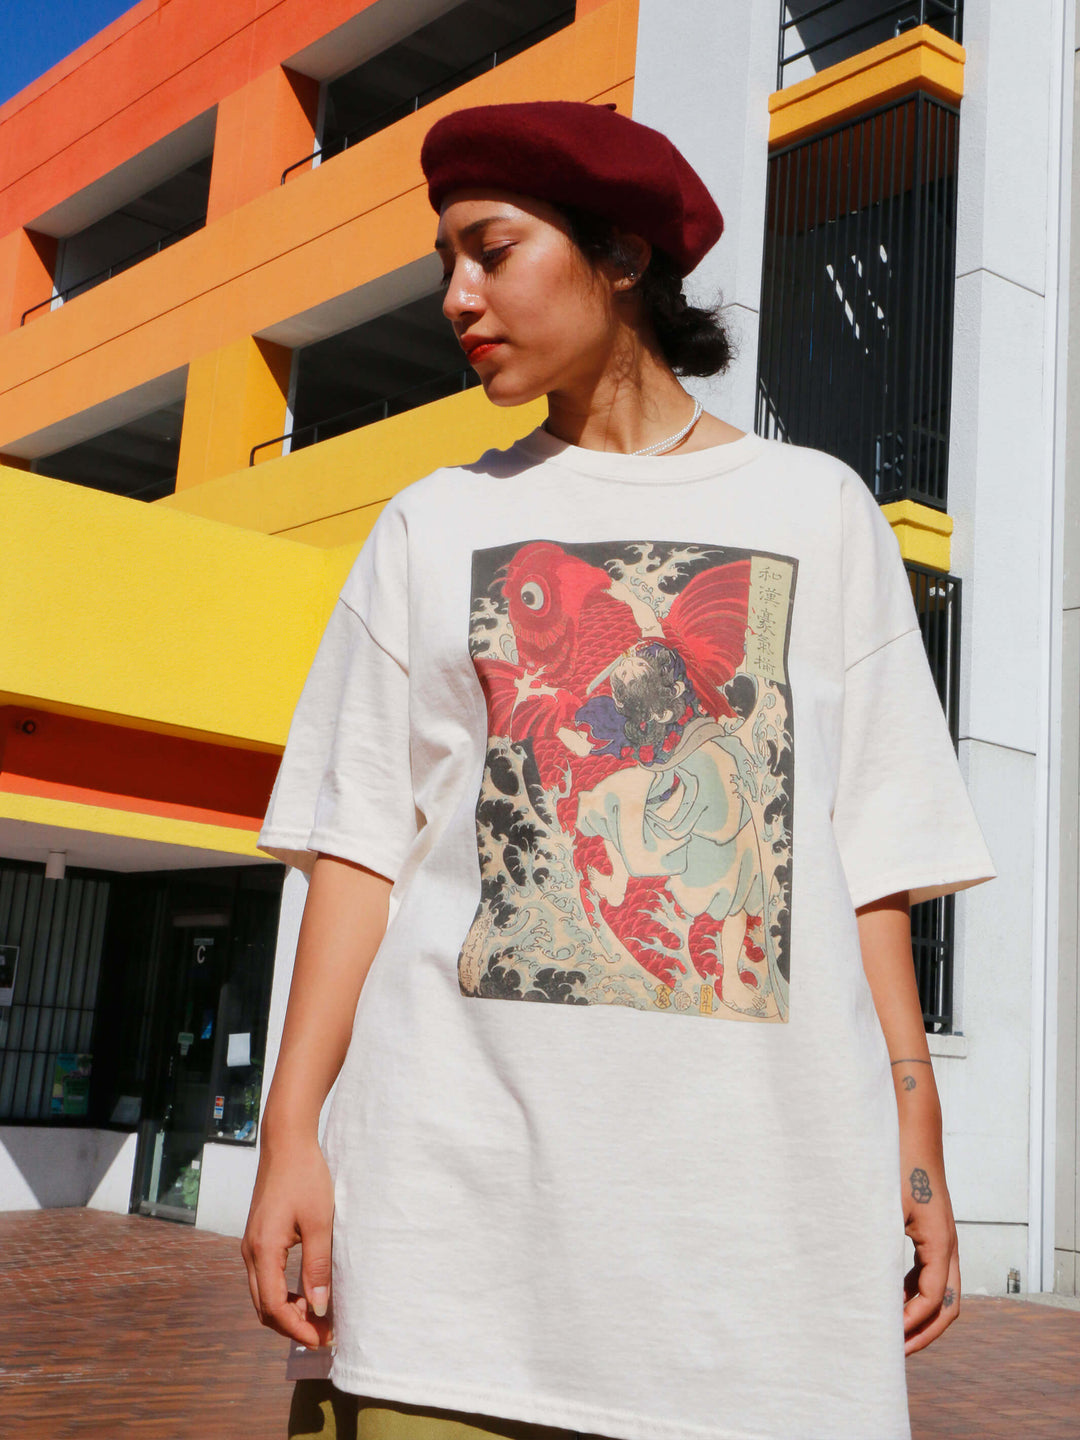 A model wearing a beige t-shirt with a Japanese koi fish on it.